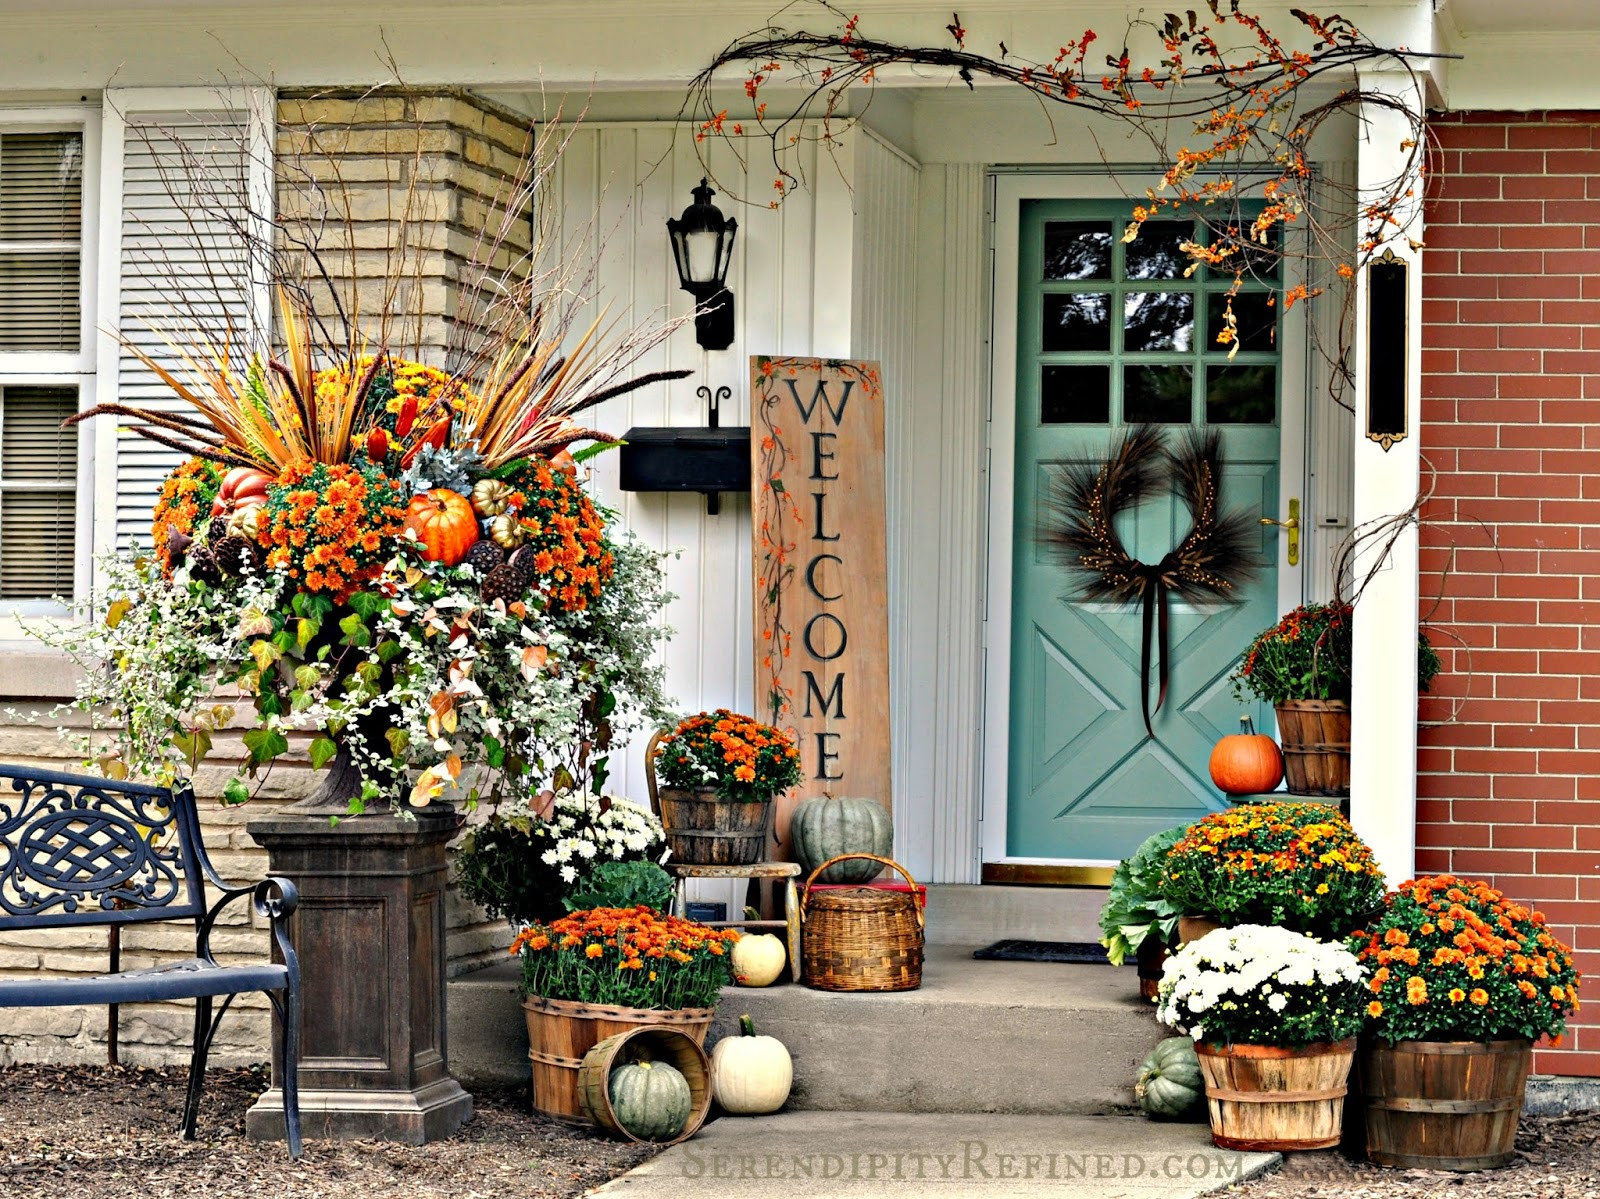 Outdoor Fall Decorating Ideas
 Fabulous Outdoor Decorating Tips and Ideas for Fall ZING